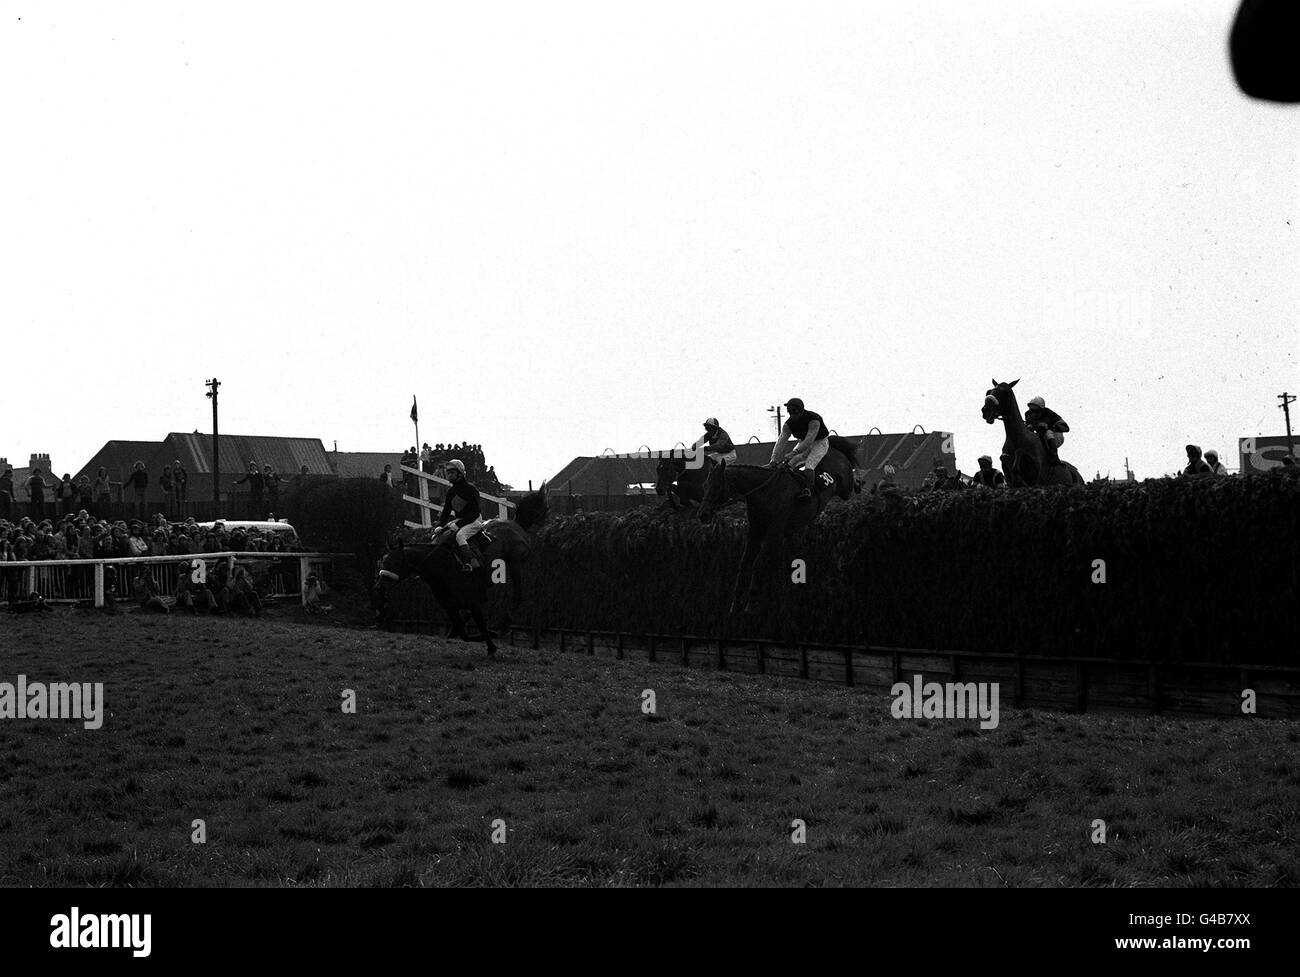 PA NEWS PHOTO 31/3/74 'RED RUM' CLEARS BECHER'S BROOK (LEFT) IN THE GRAND NATIONAL RIDEEN BY BRIAN FLETCHER TO WIN THE FAMOUS YEARLY RACE AT LIVERPOOL Stock Photo